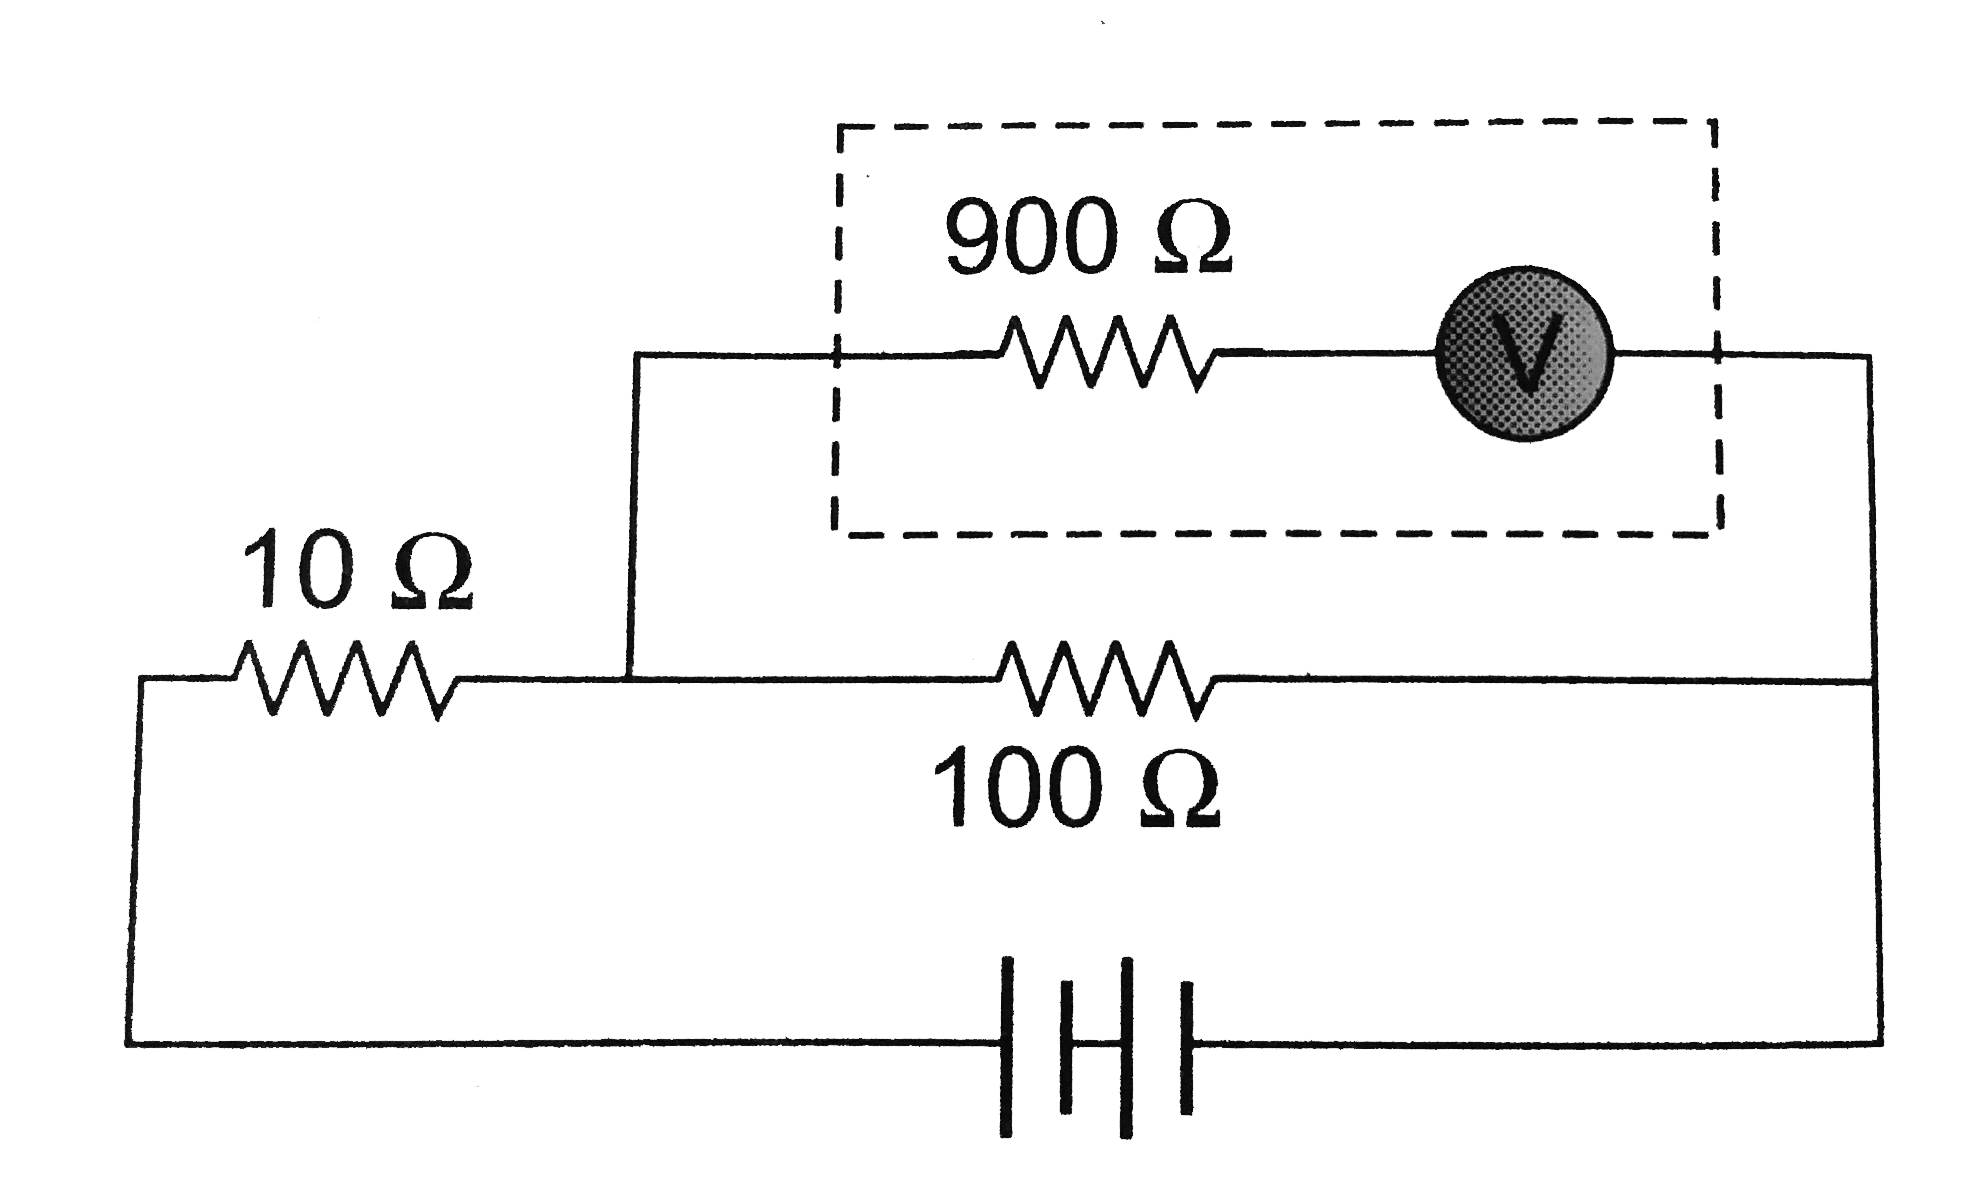 The potential difference across the 100 Omega resistance in the following circuit is measured by a voltmeter of 900 Omega resistance. The percentage error made in reading the potential difference is